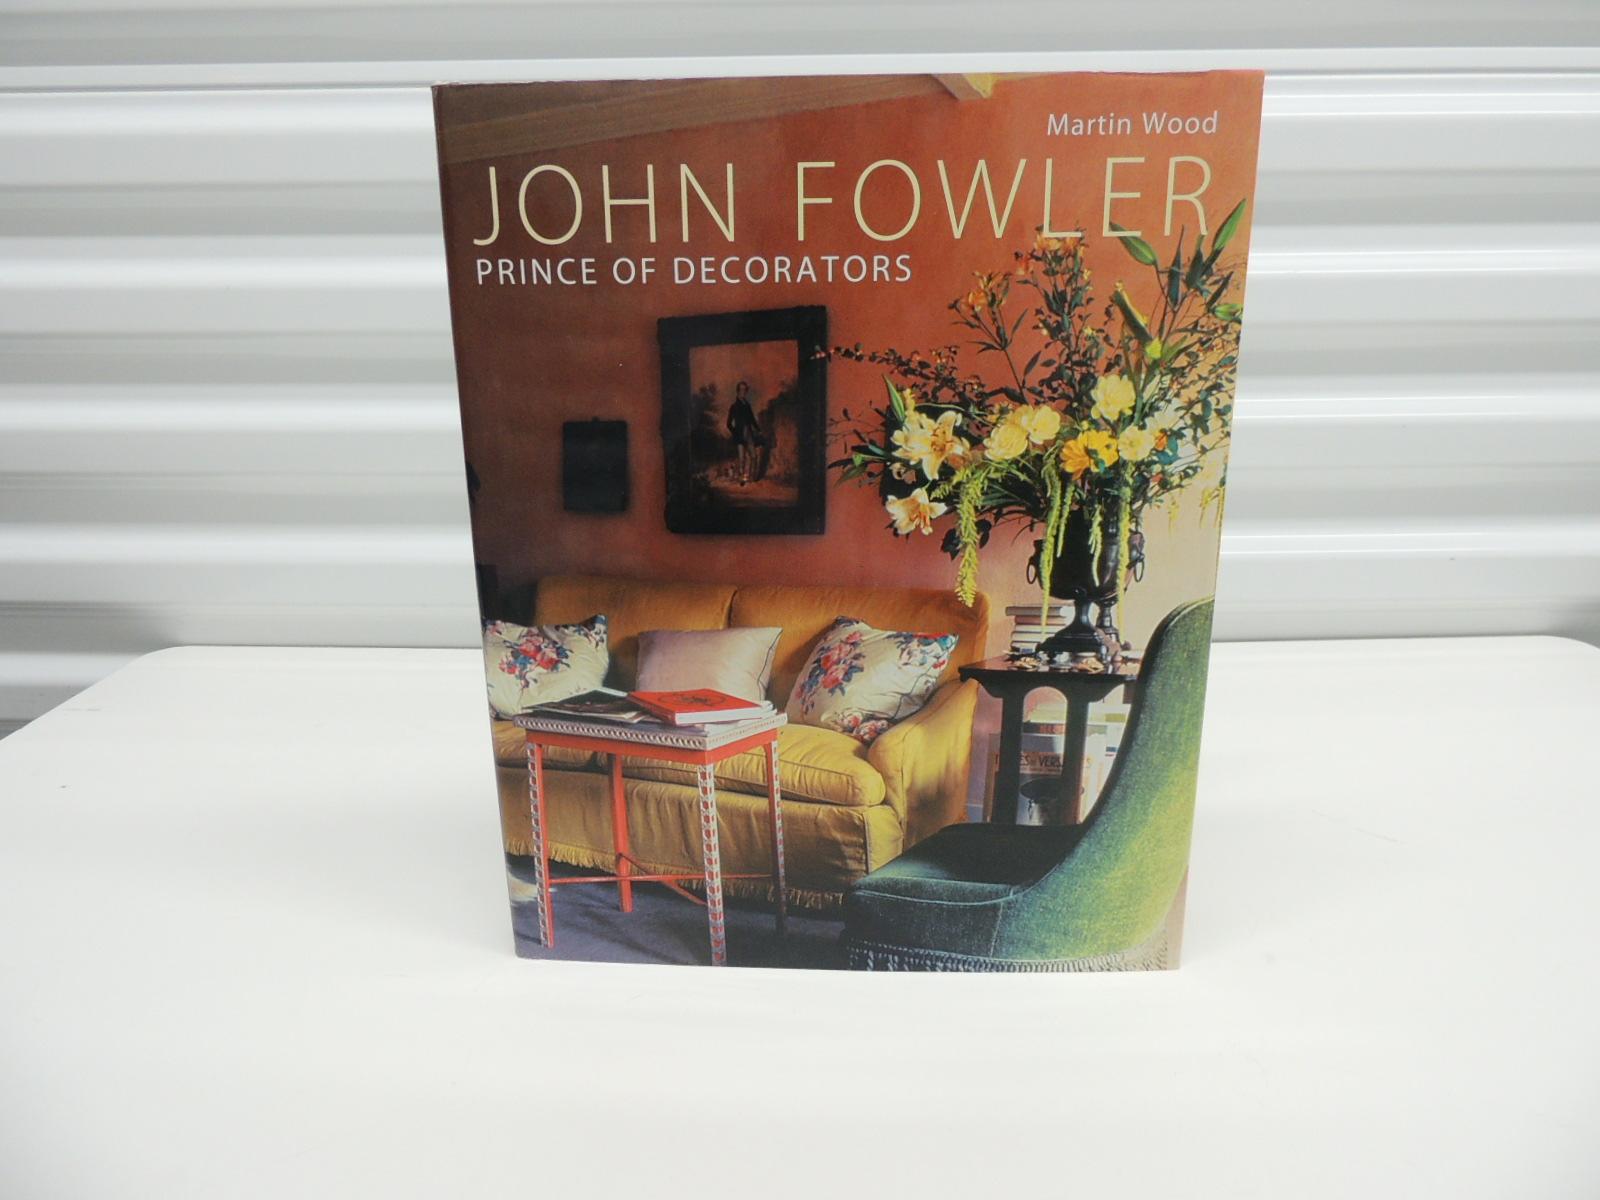 John Fowler was an interior decorator who set fashions and changed tastes. The English country house style, which he developed with Sibyl Colefax and Nancy Lancaster, his partners in the firm of Colefax & Fowler, has proved a source of continuing